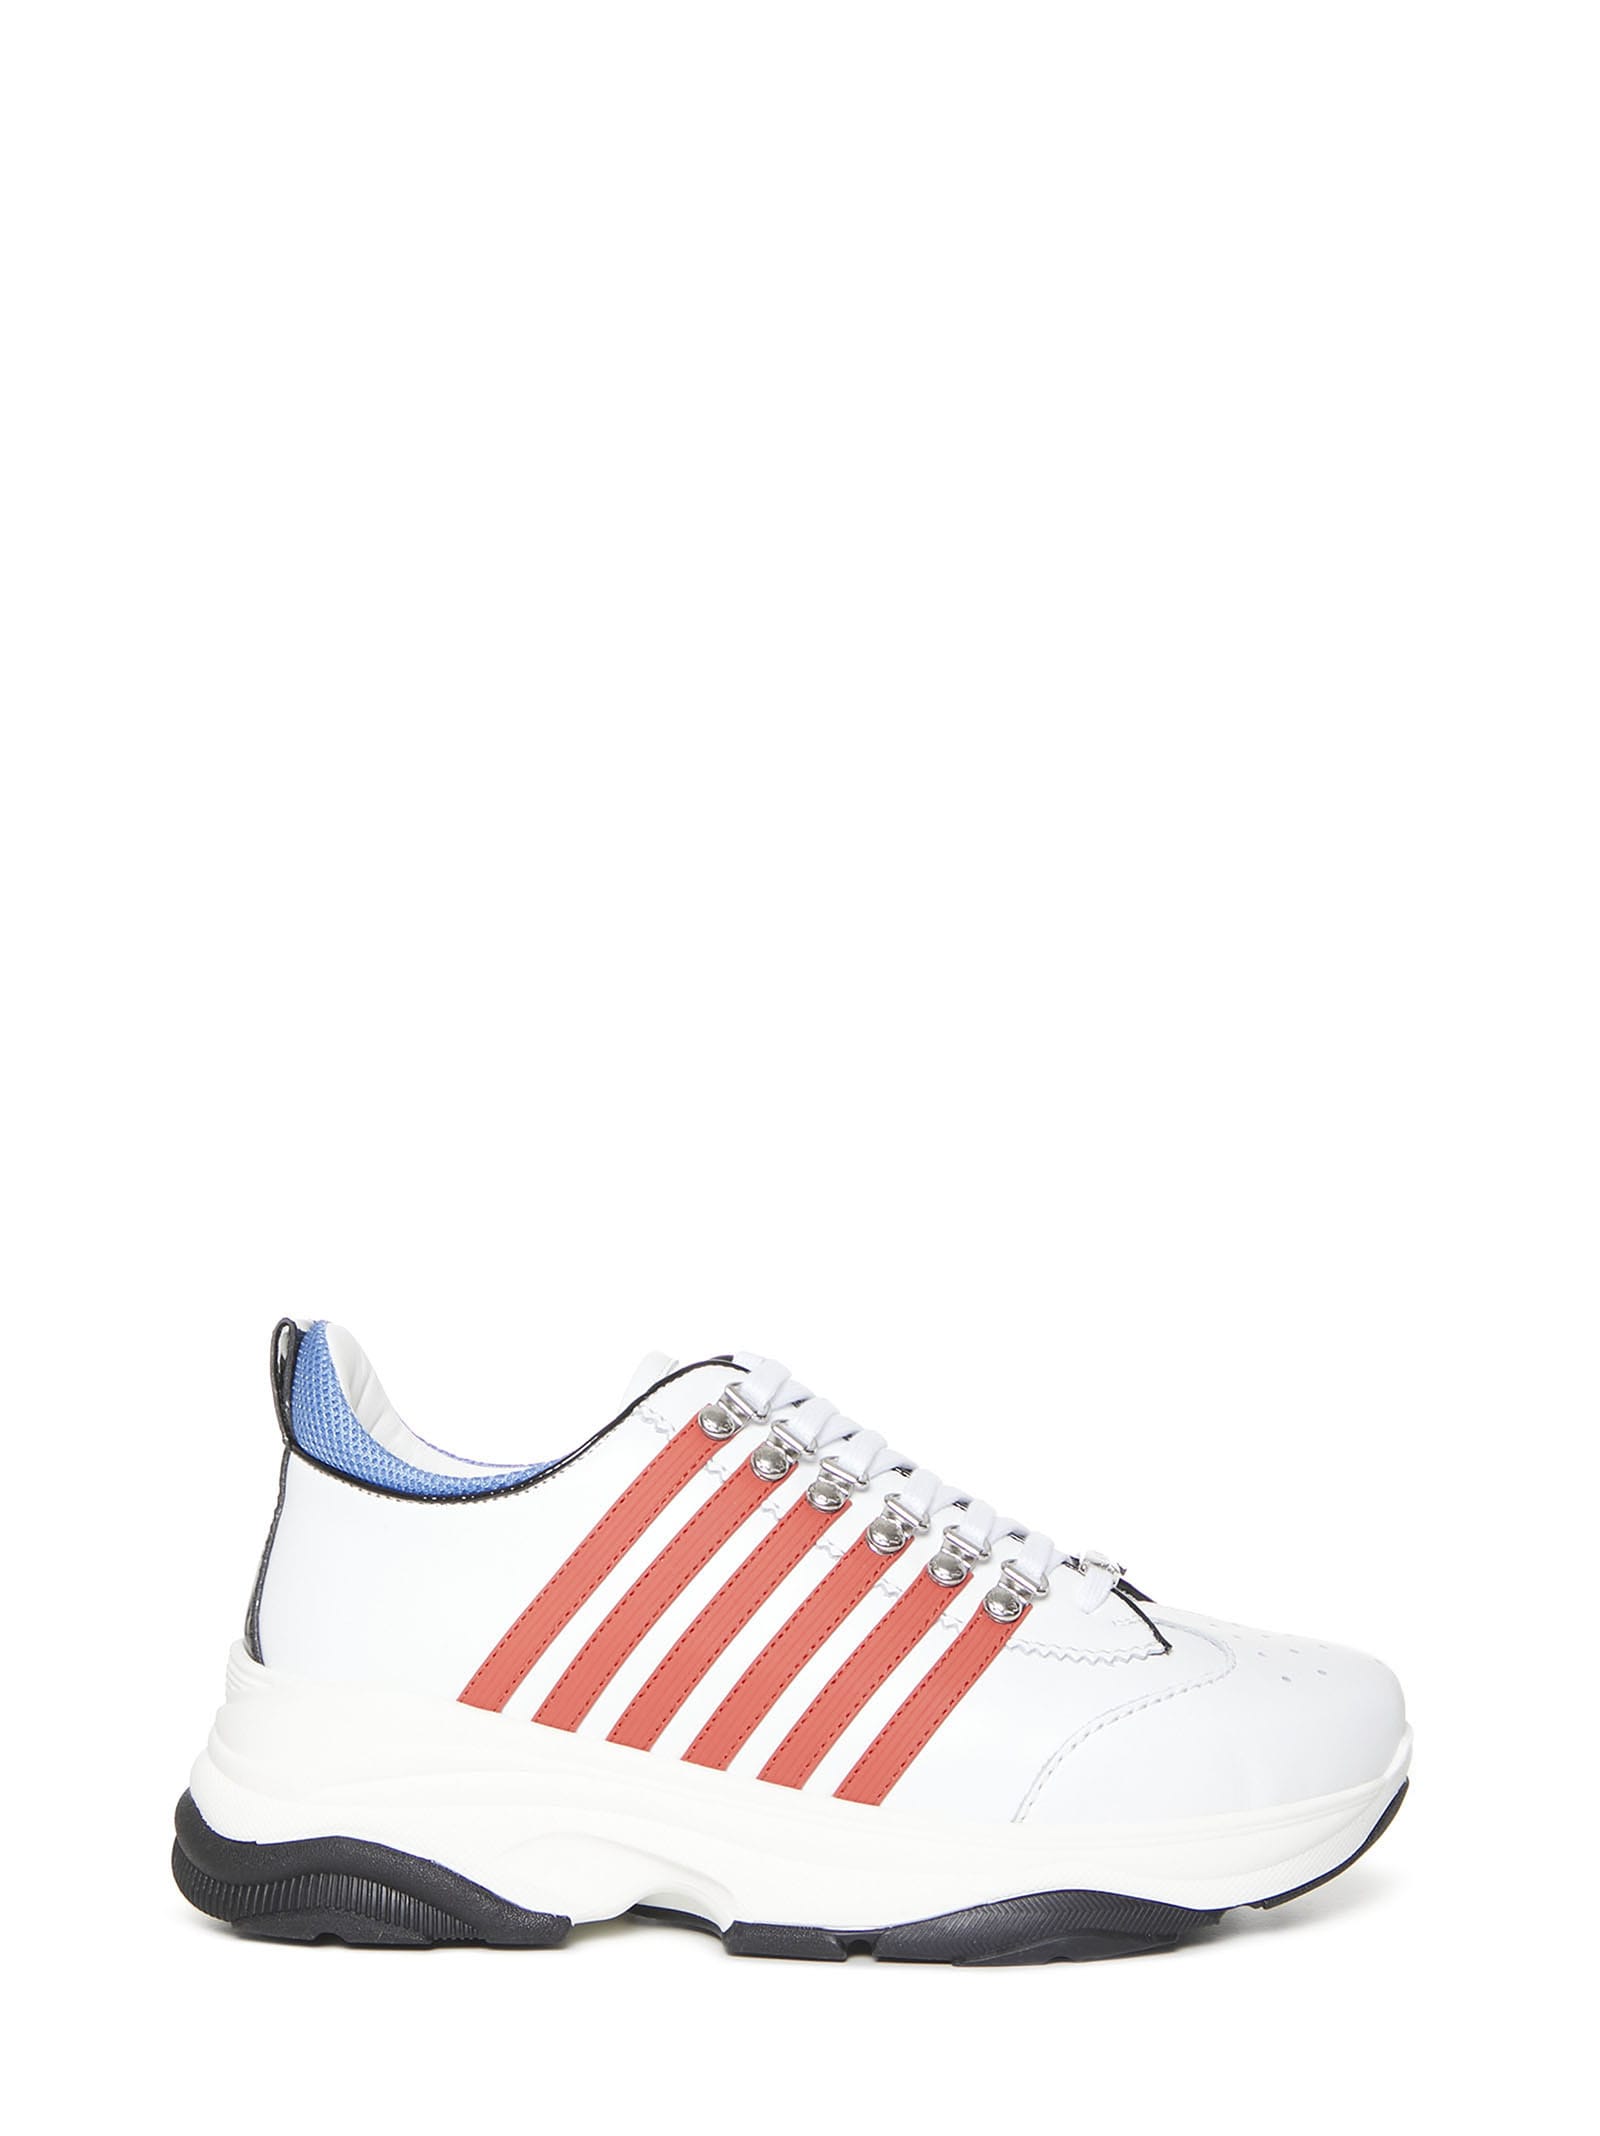 DSQUARED2 BUMPY 251 trainers,11271038